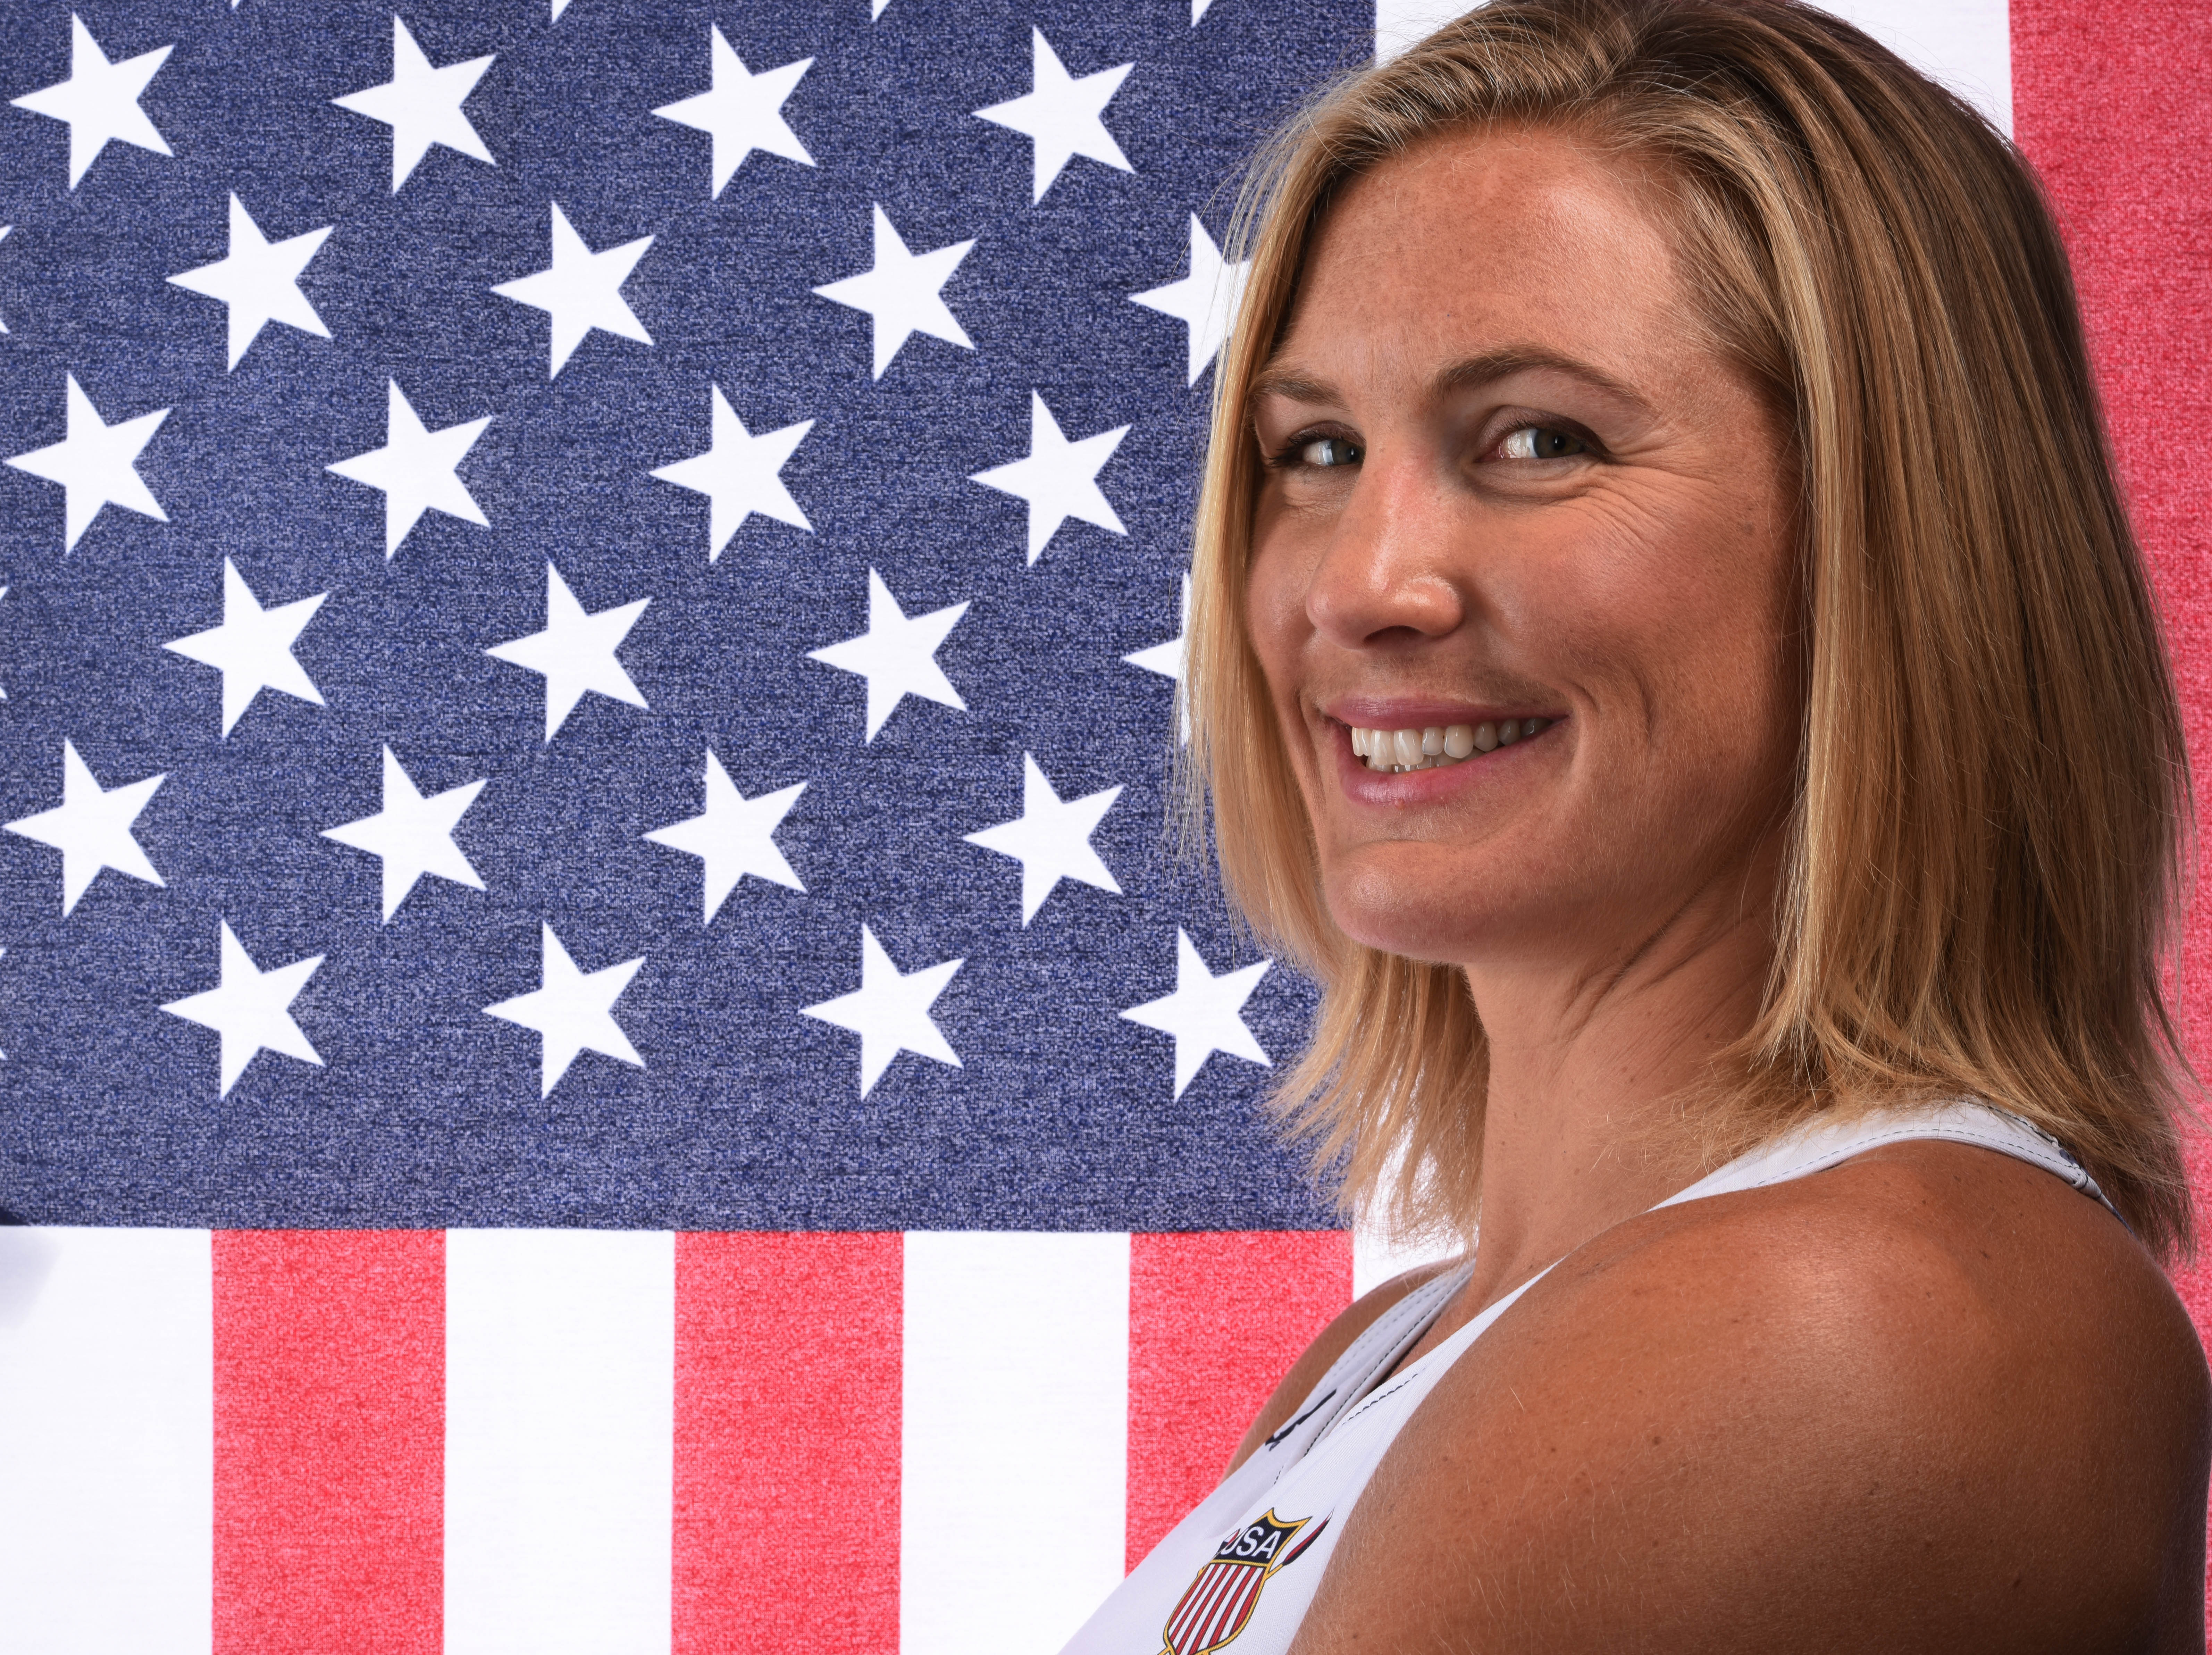 Upstate NY native just misses medaling in women's 8 rowing at Paris Olympics